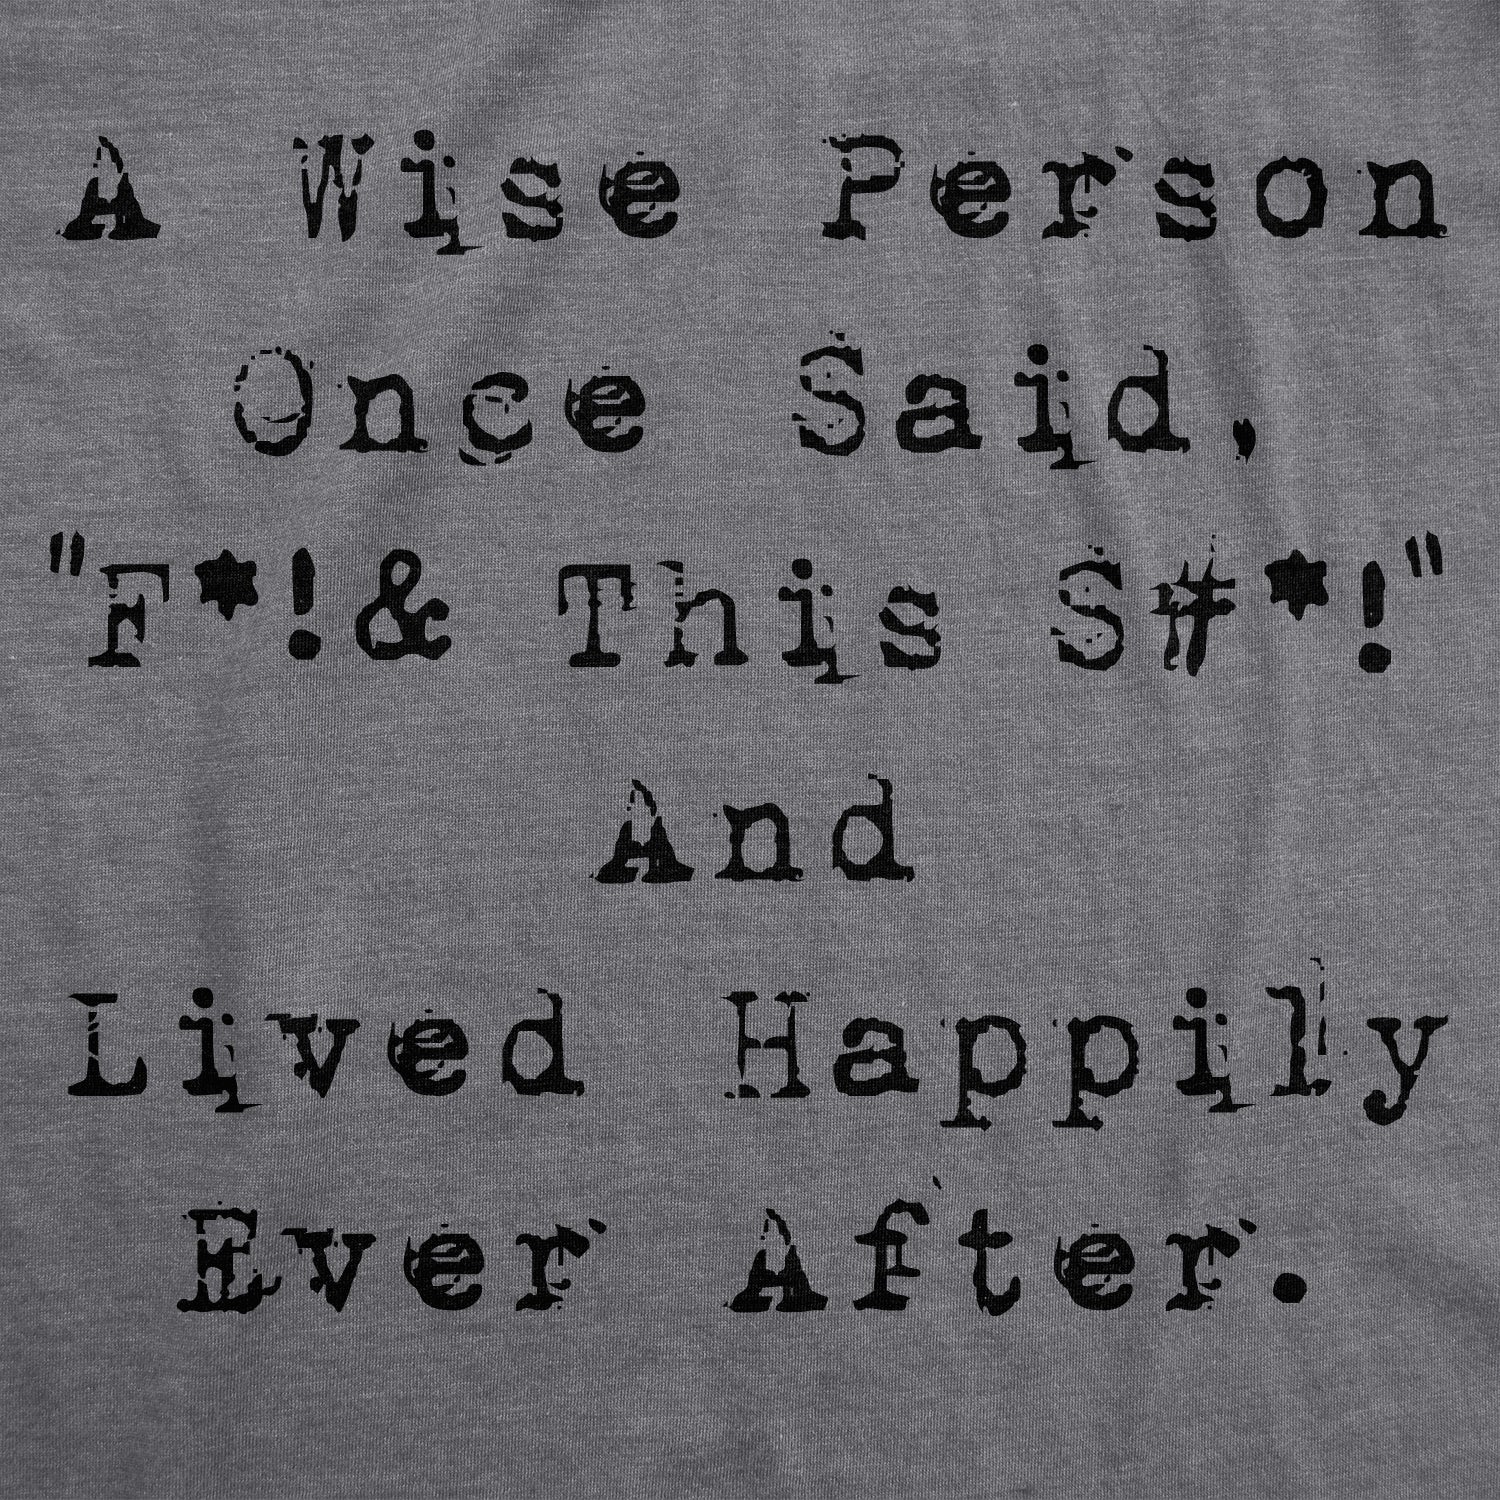 Funny Dark Heather Grey Wise Person Lived Happily Ever After Womens T Shirt Nerdy Tee